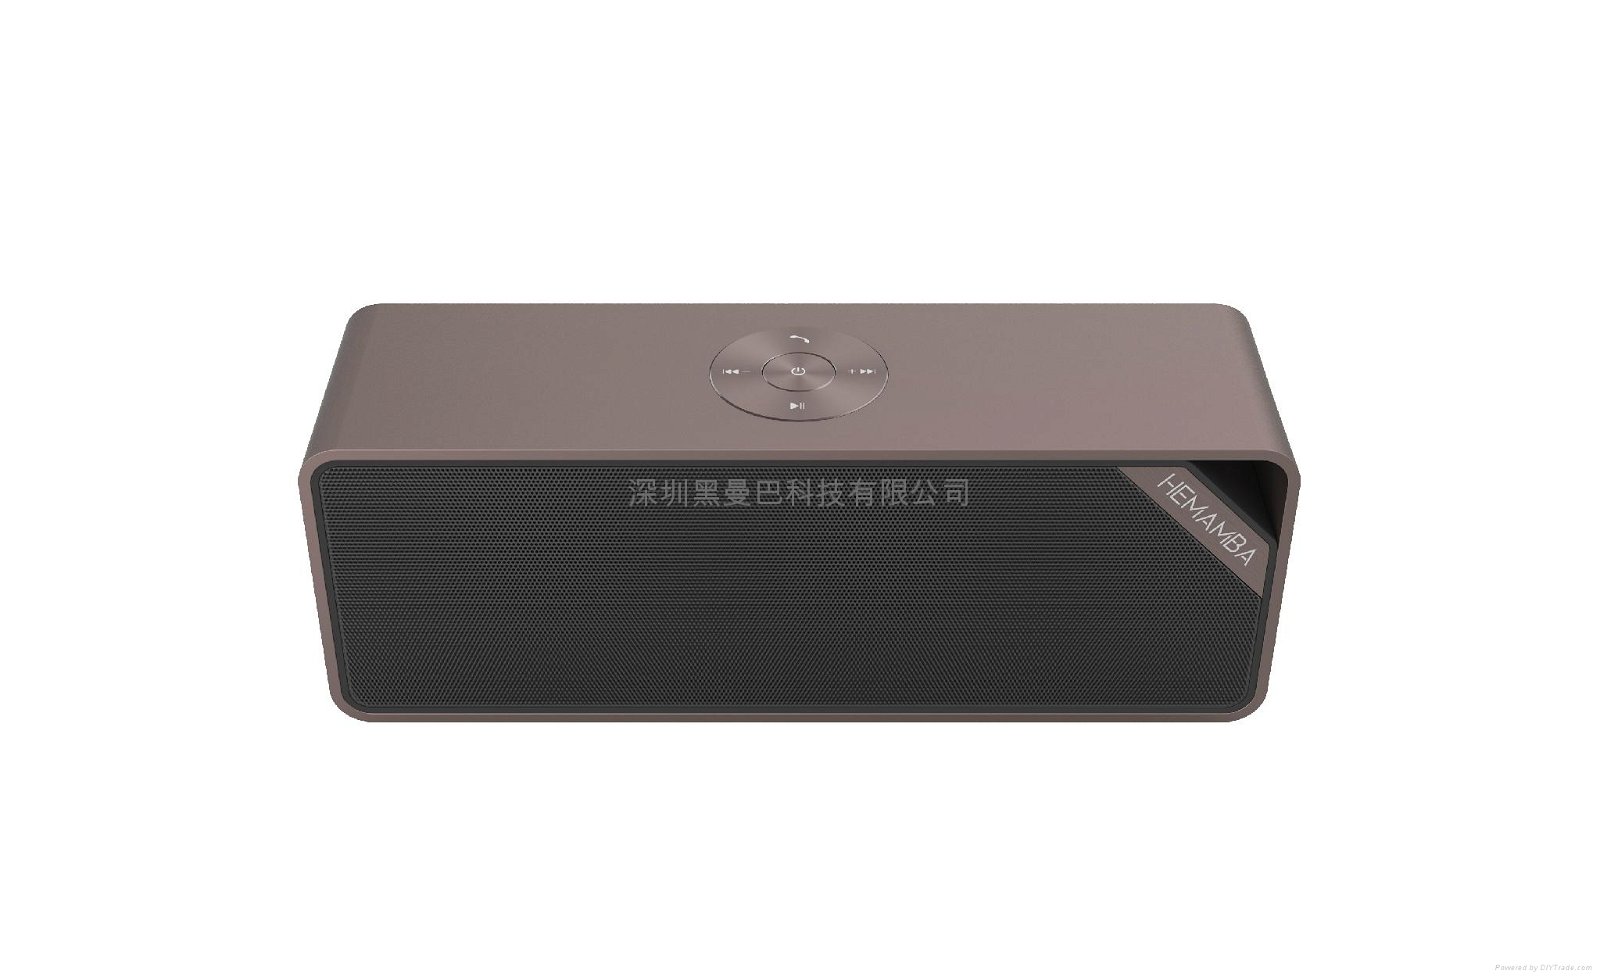 The Best Portable BT Speaker Wireless Bluetooth Speaker Stereo with NFC 3